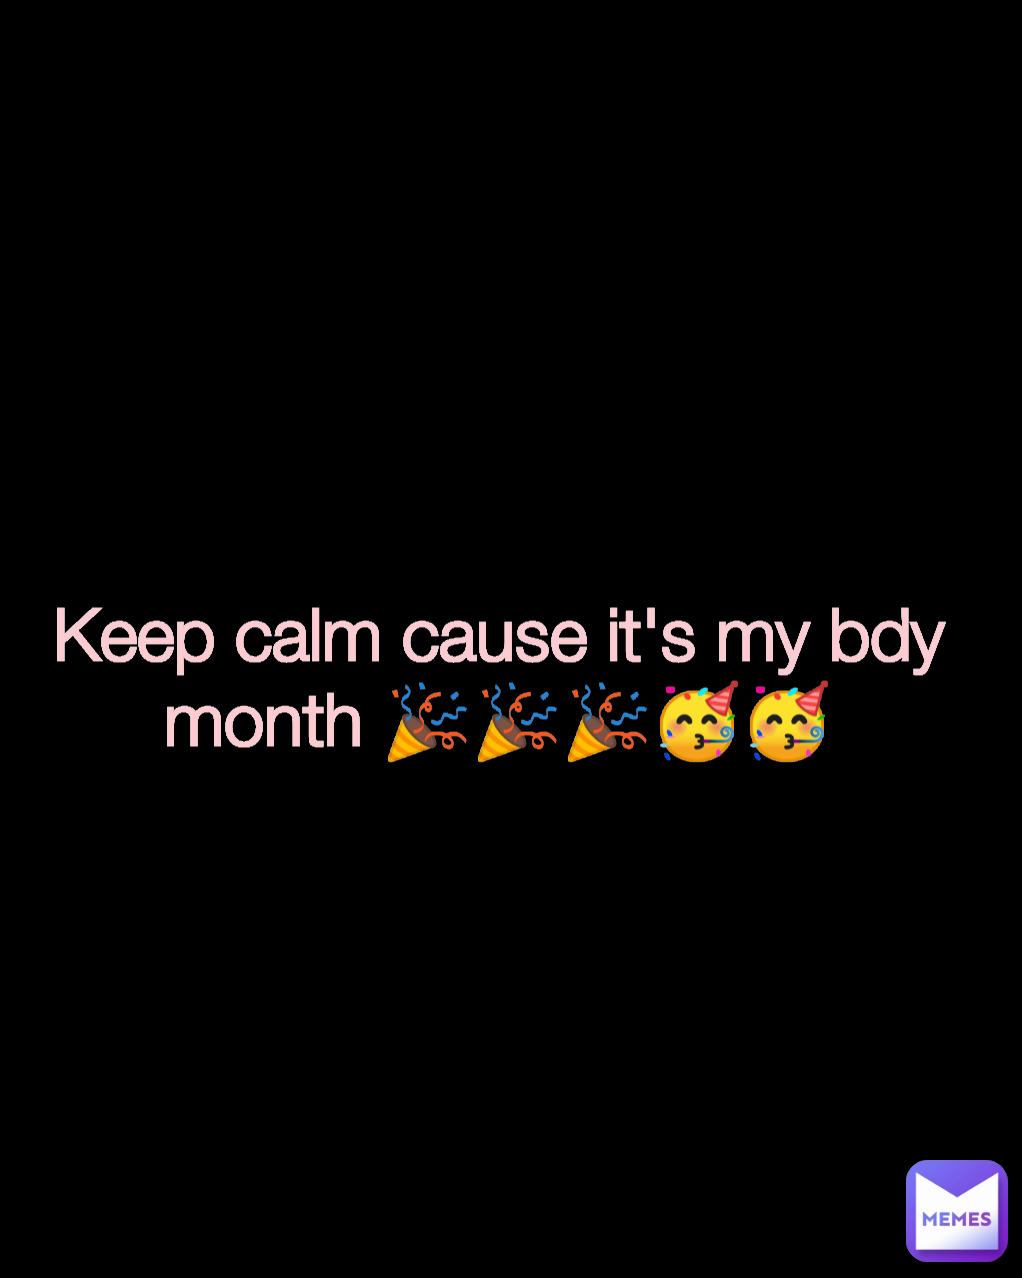 Keep calm cause it's my bdy month 🎉🎉🎉🥳🥳